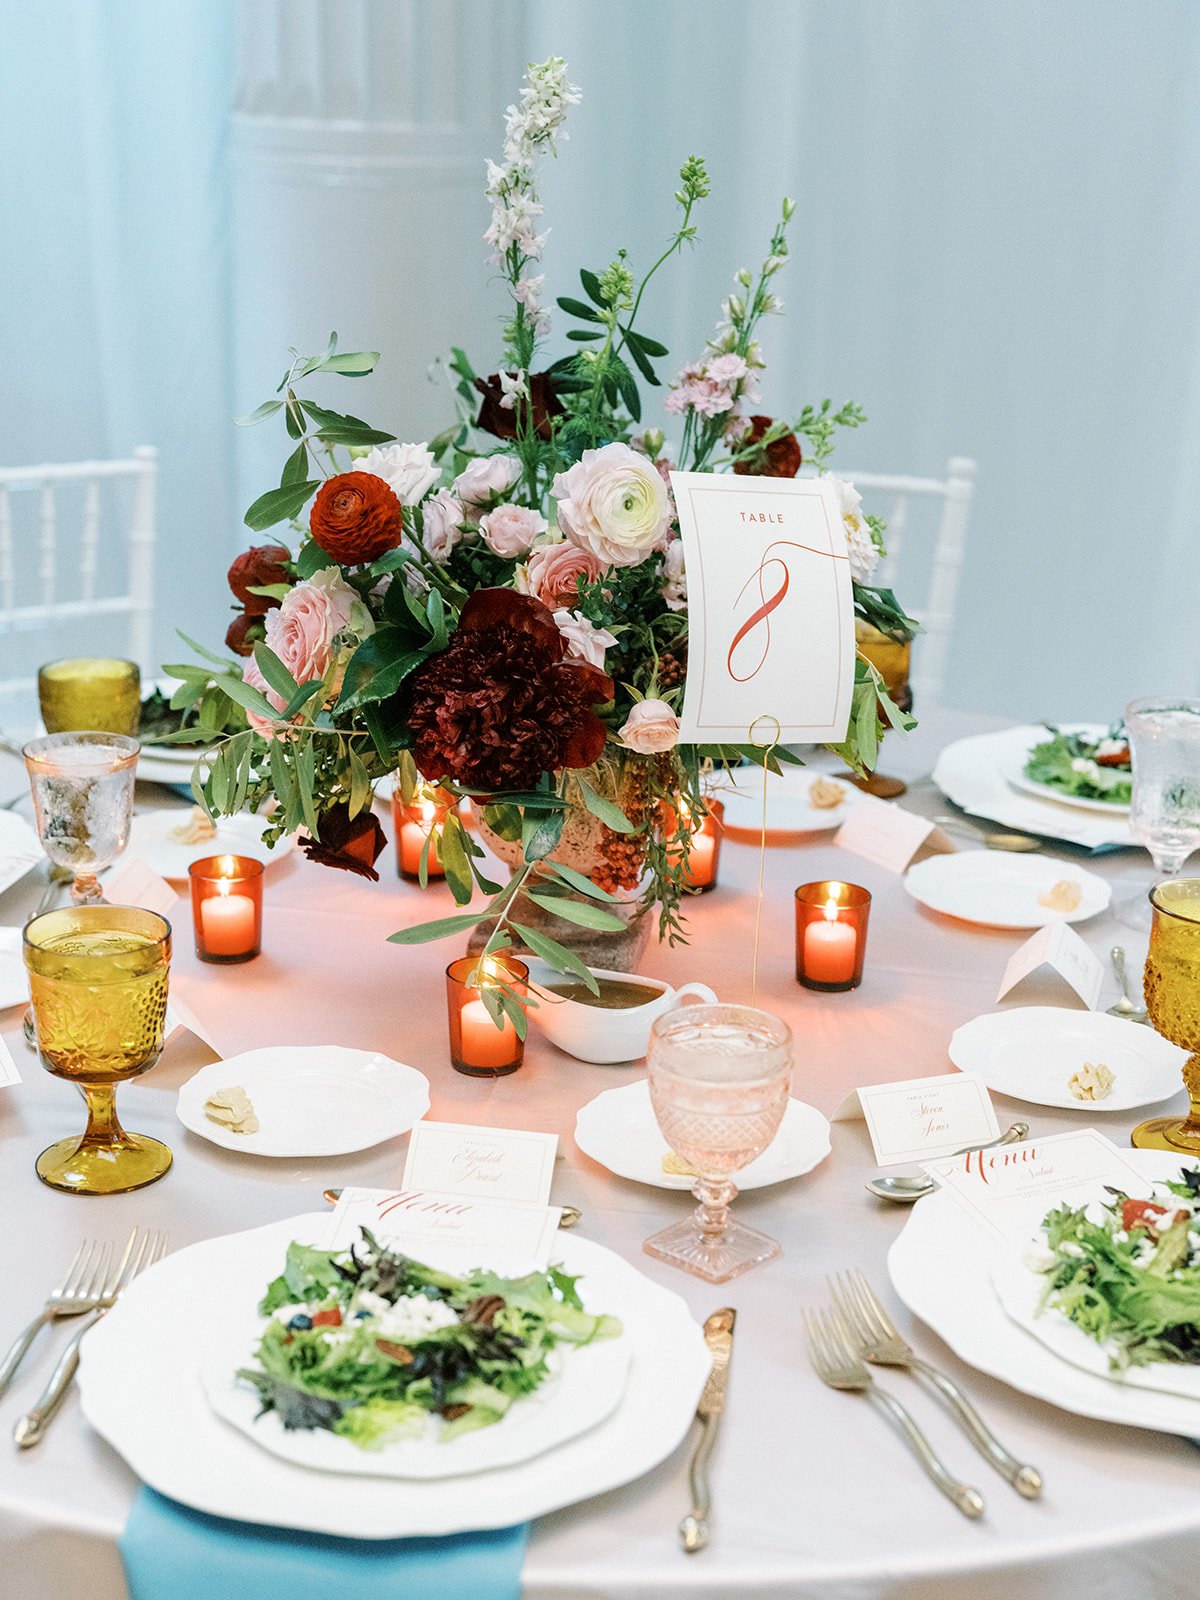 Beautiful reception adorned with marble busts covered in florals and lush centerpieces. The summer solstice color palette was filled with garden roses, peonies, ranunculus, pepper berry and fresh fruit. Design by Rosemary and Finch in Nashville, TN.